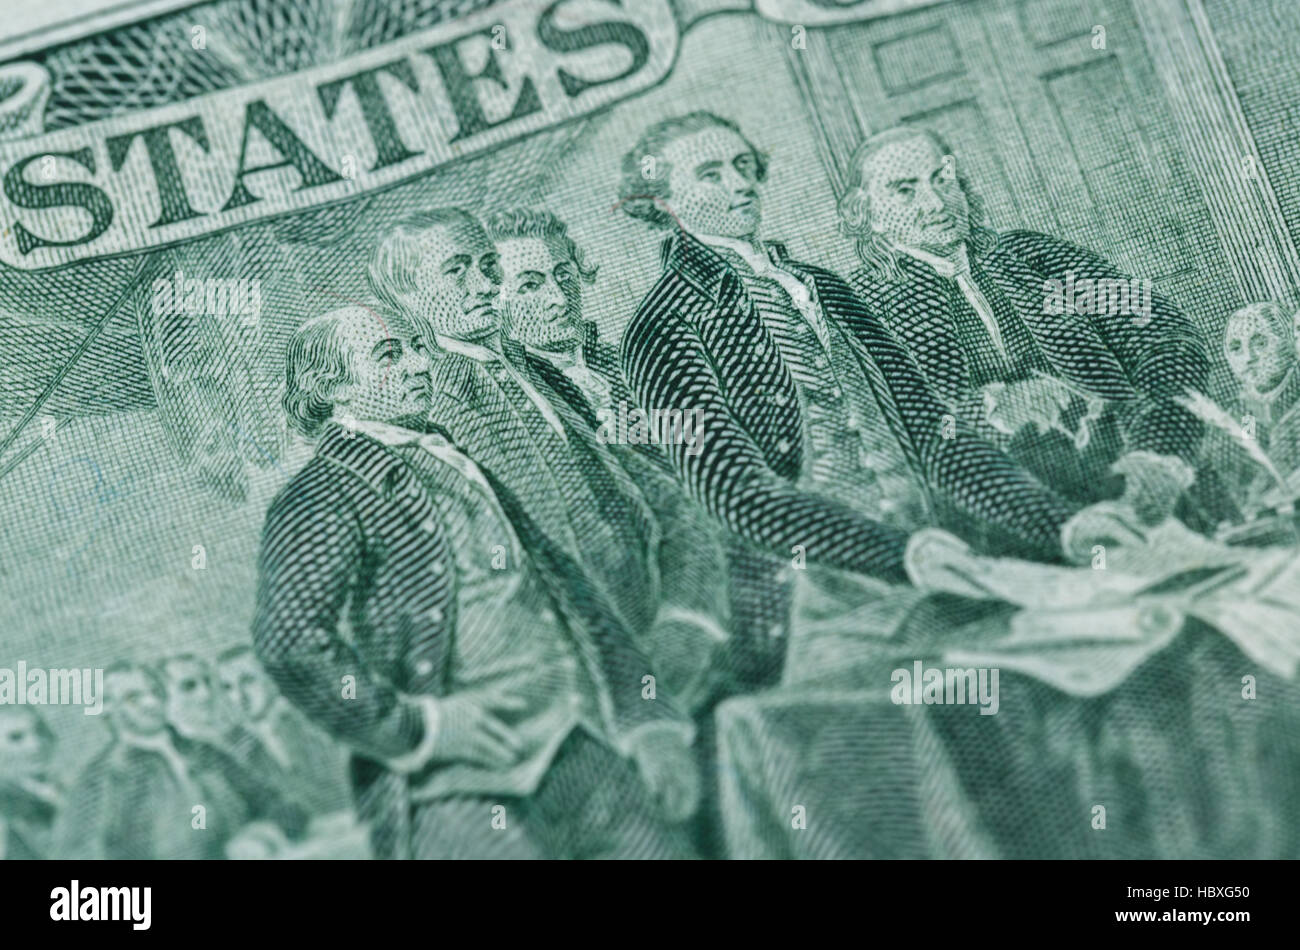 Signing declaration of independence from us two dollar bill macro, united states money closeup Stock Photo